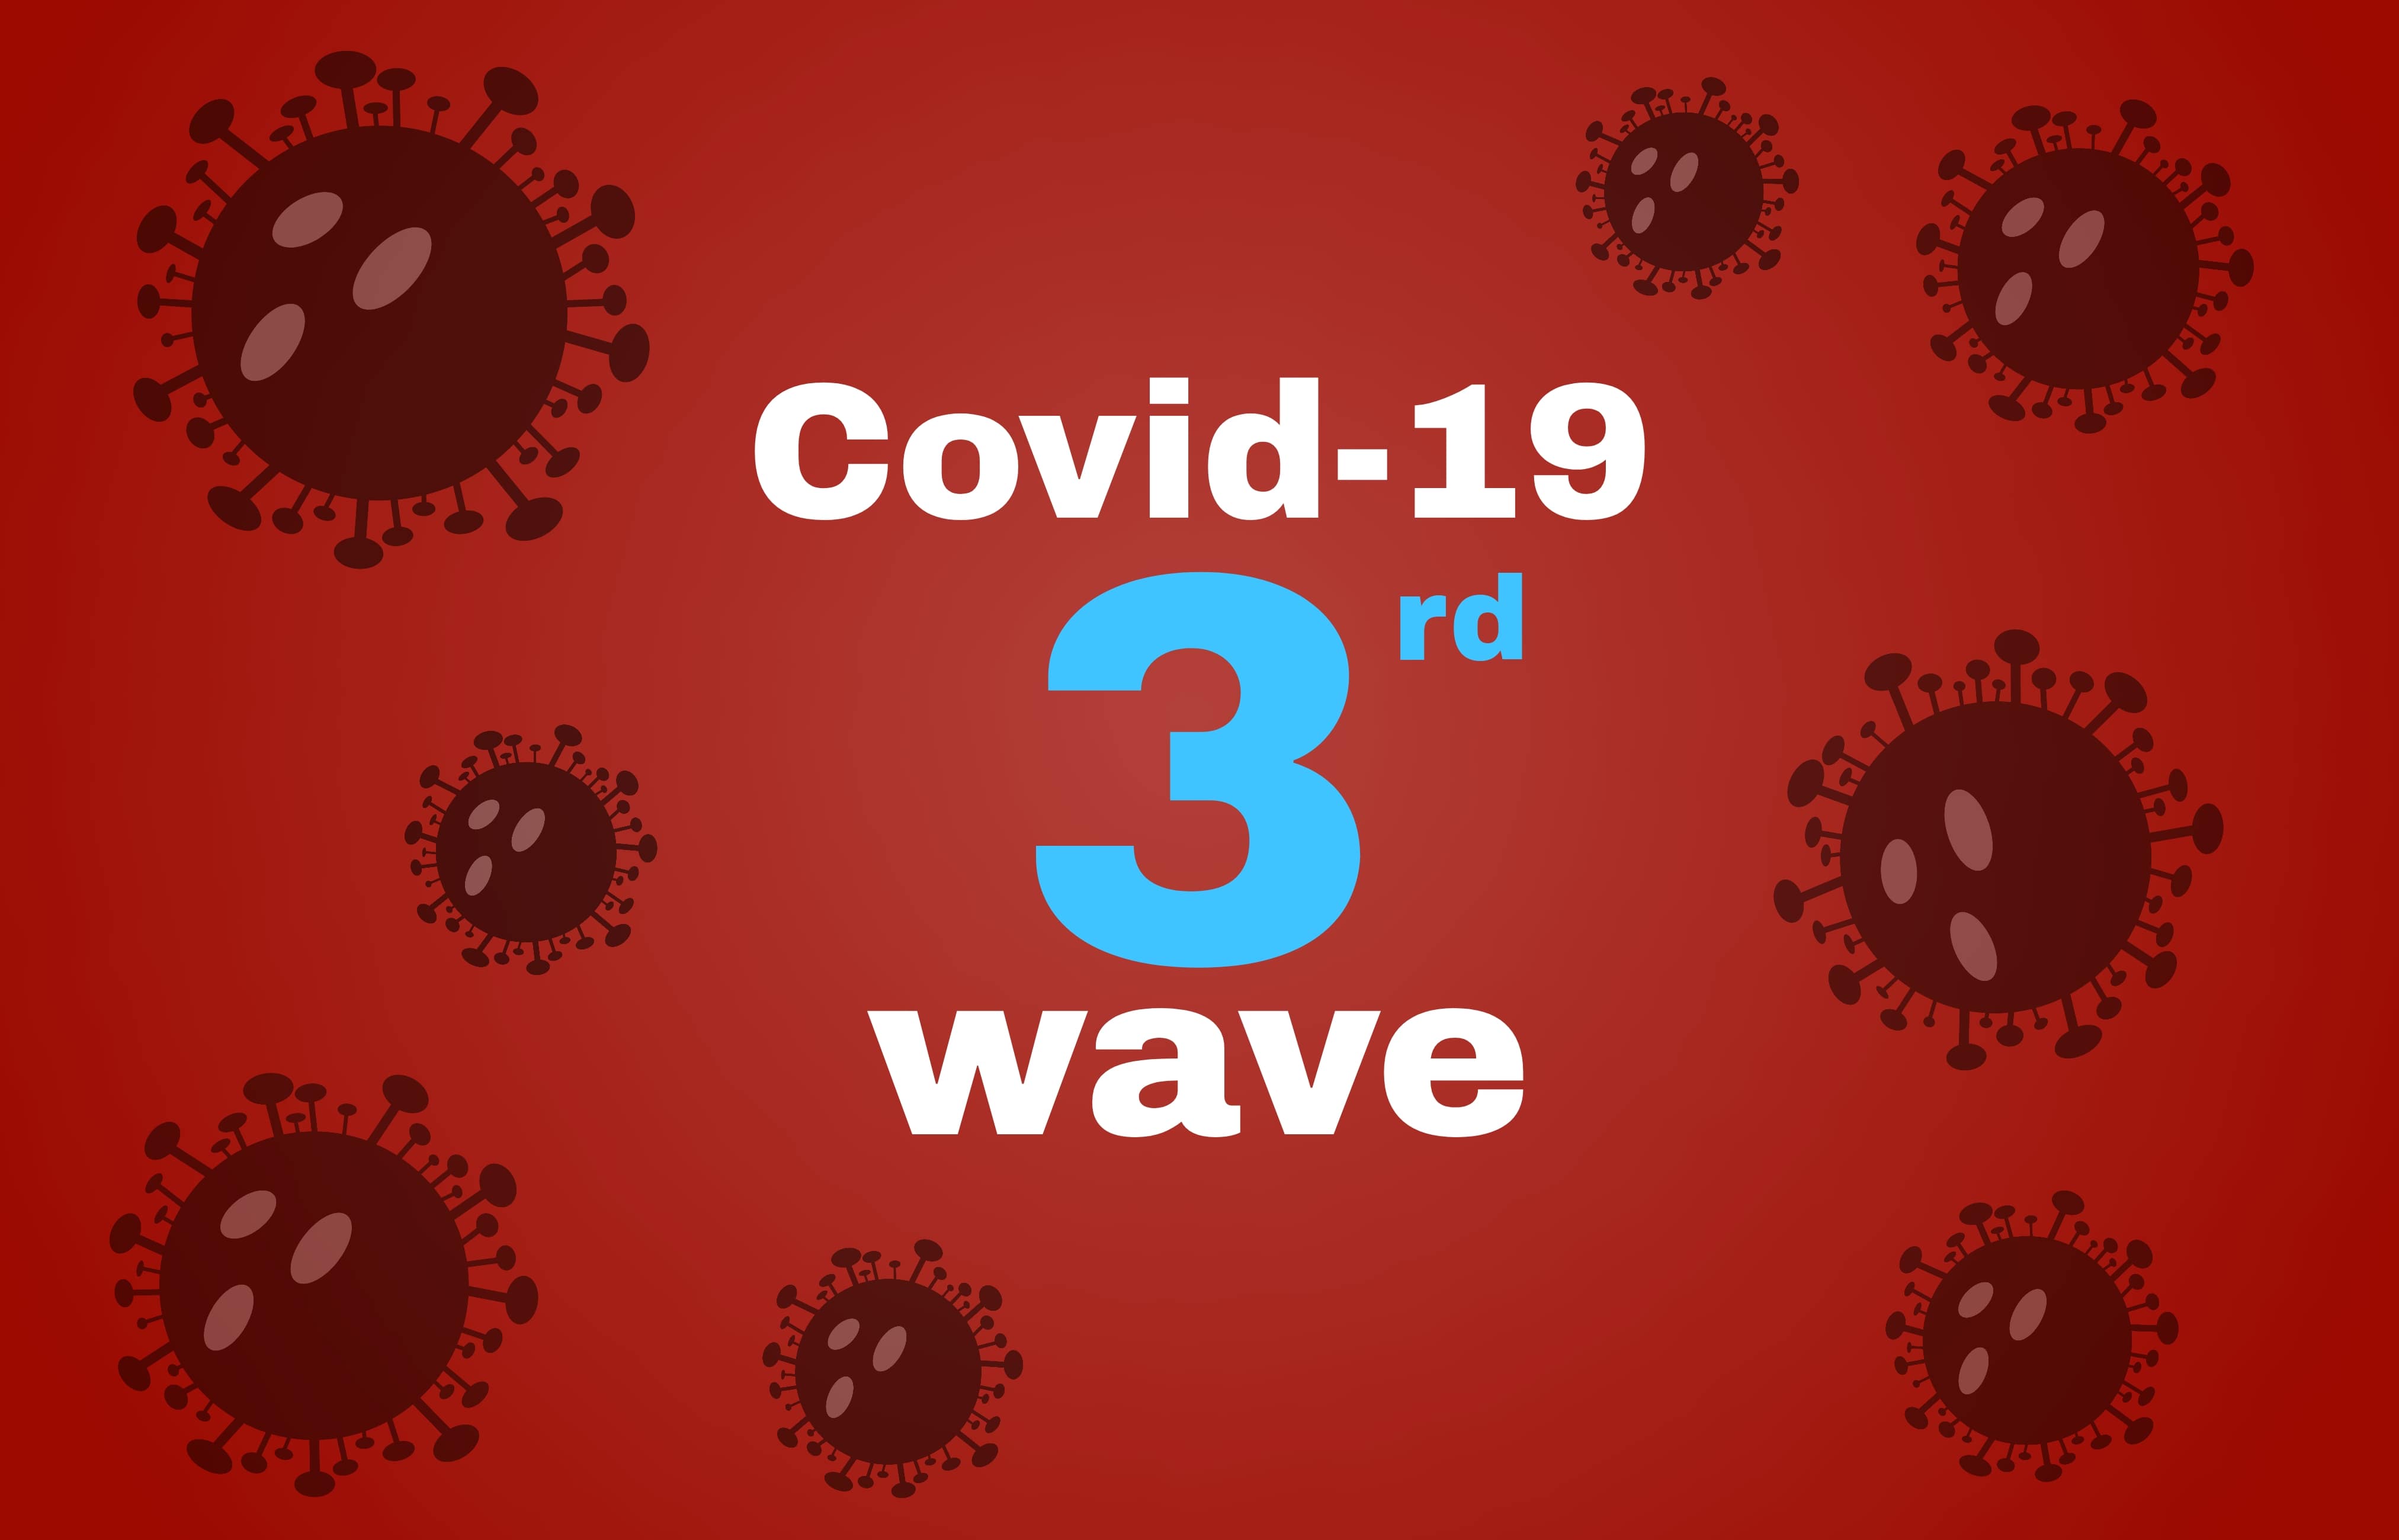 Is India Actually Heading for the Third Wave of Covid-19?